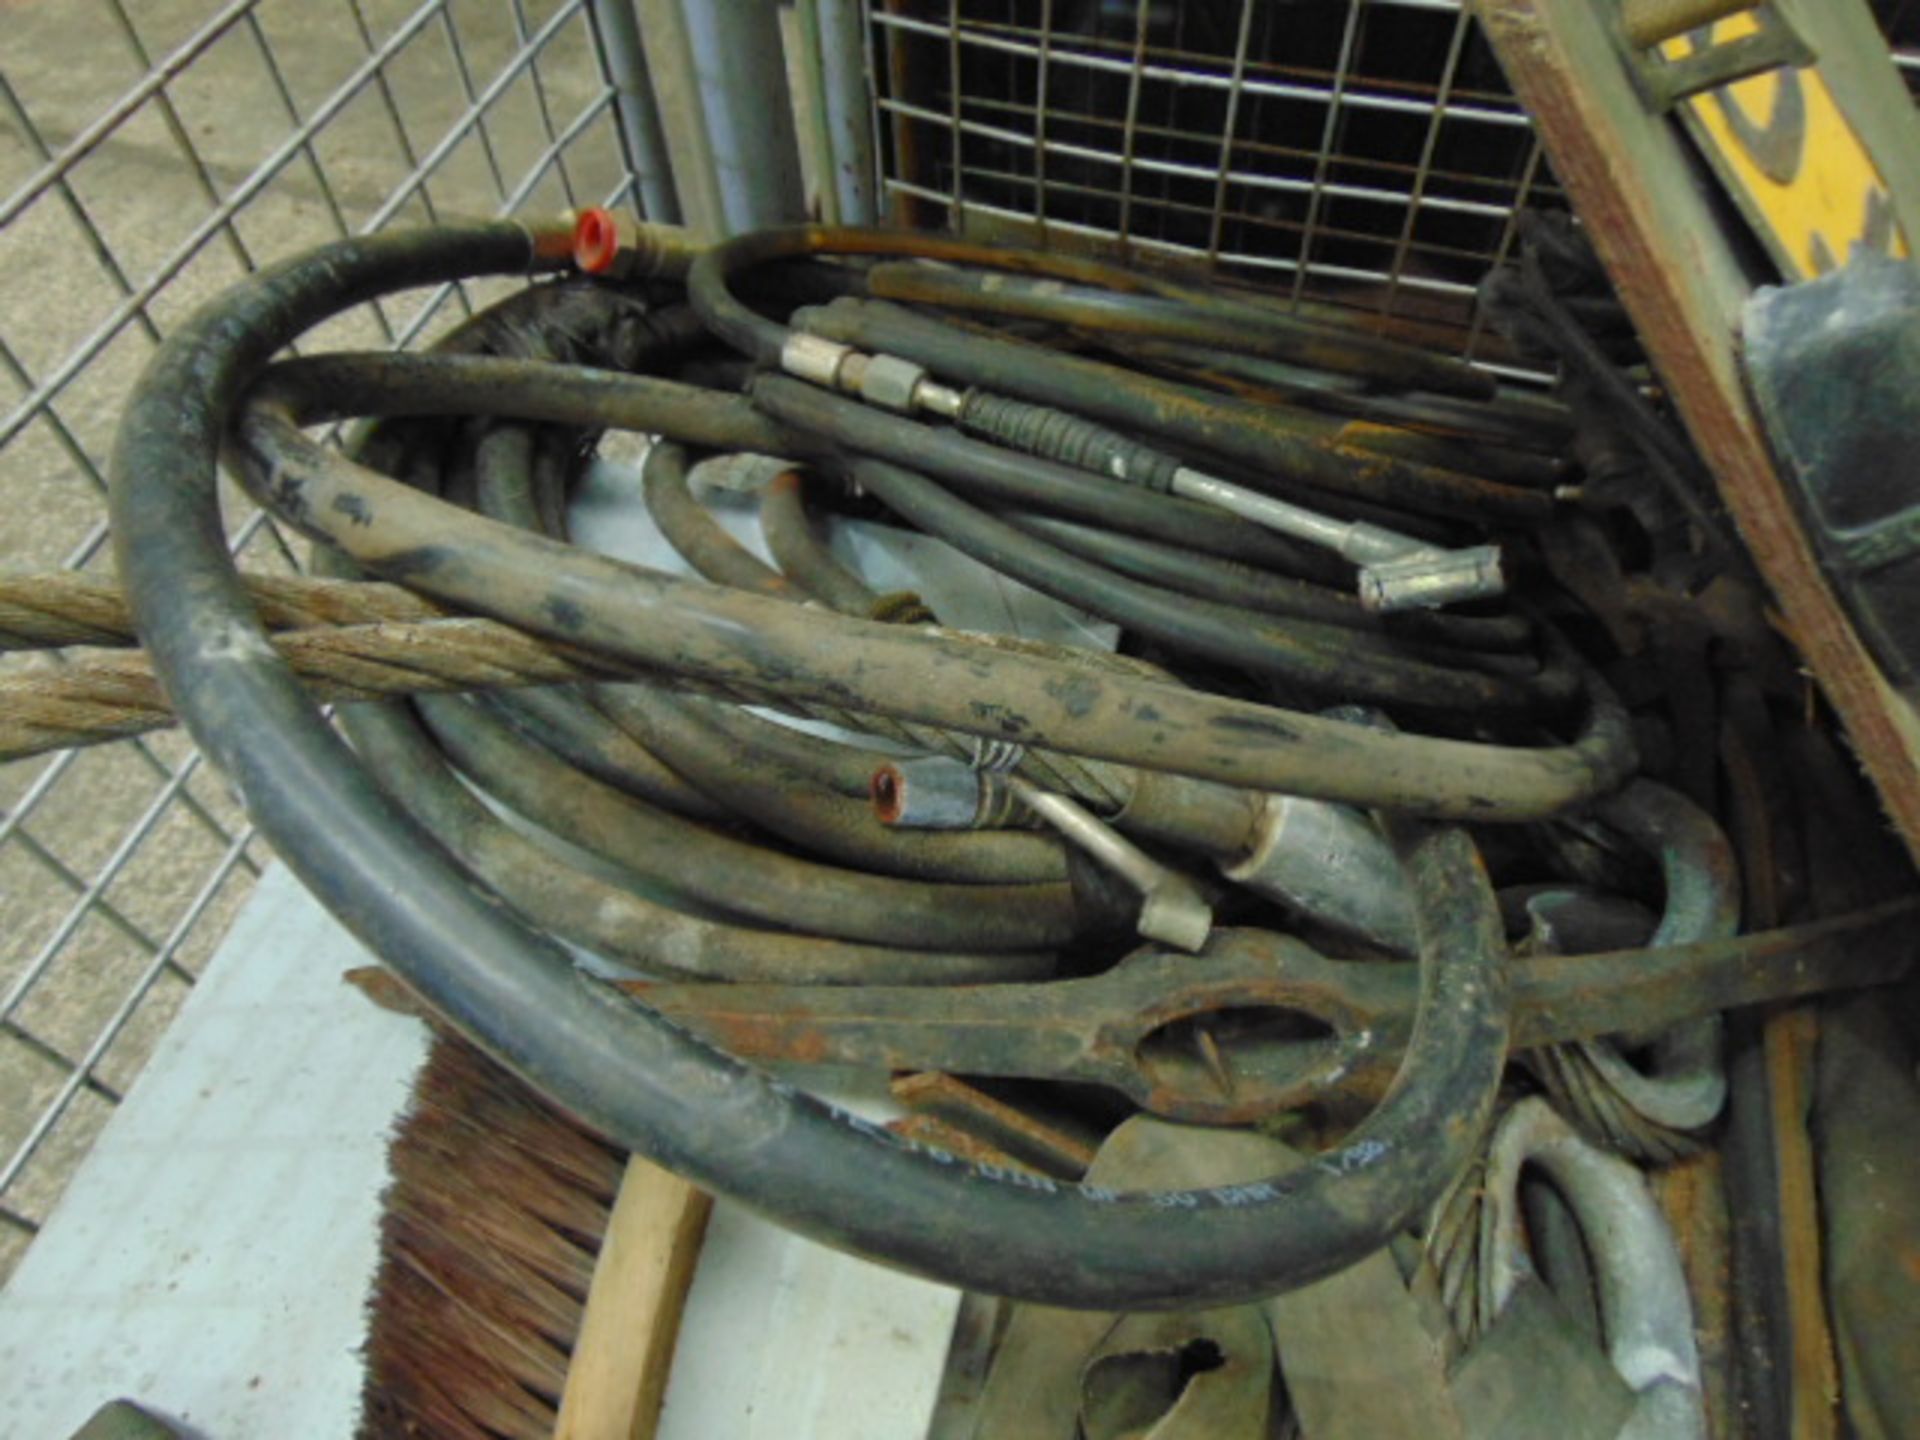 Mixed Stillage Wire Ropes, Air Lines, Light Board, Strops etc - Image 5 of 5